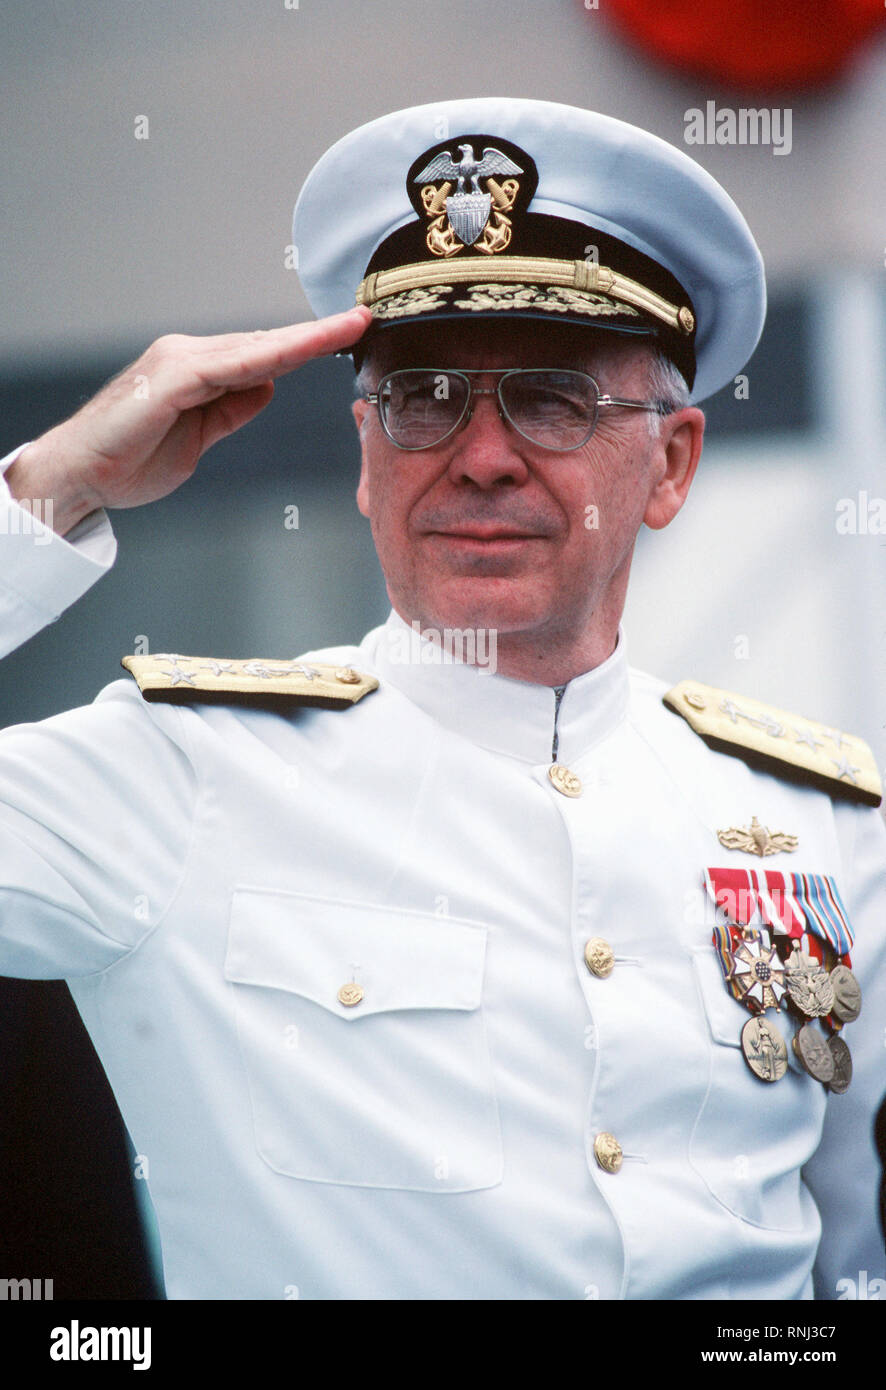 1982 - VADM Robert L. Walters, deputy chief of naval operations, Surface Warfare, salutes during the launching ceremony for the nuclear-powered attack submarine USS BUFFALO (SSN-715). Stock Photo